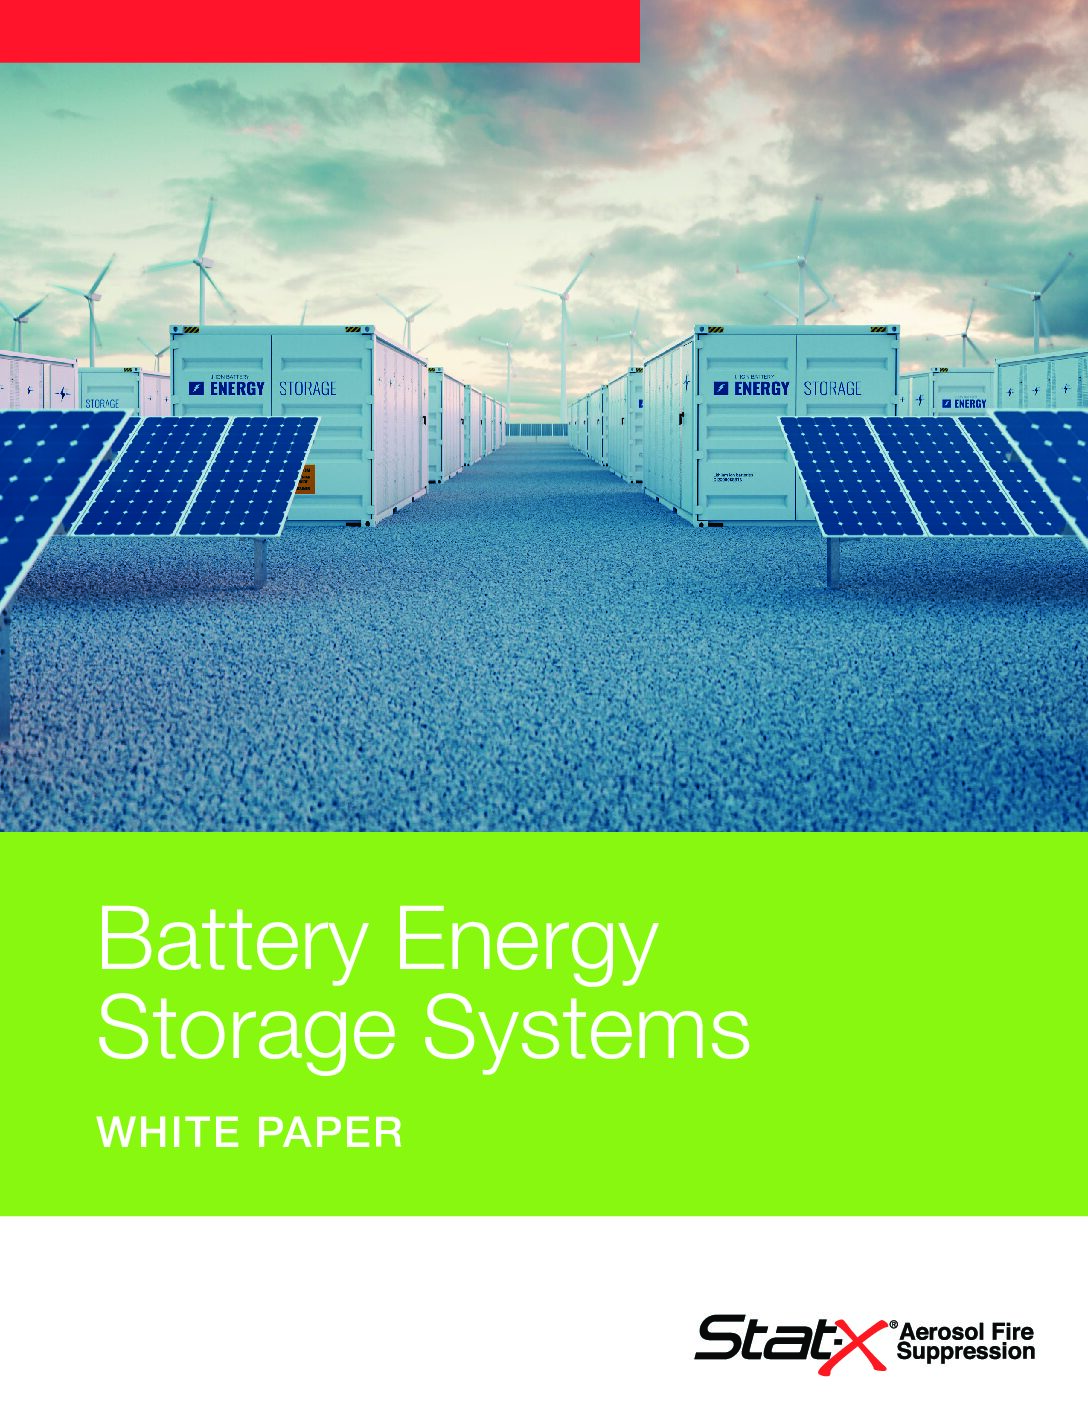 Stat-X® Fire Suppression: Battery Energy Storage Systems